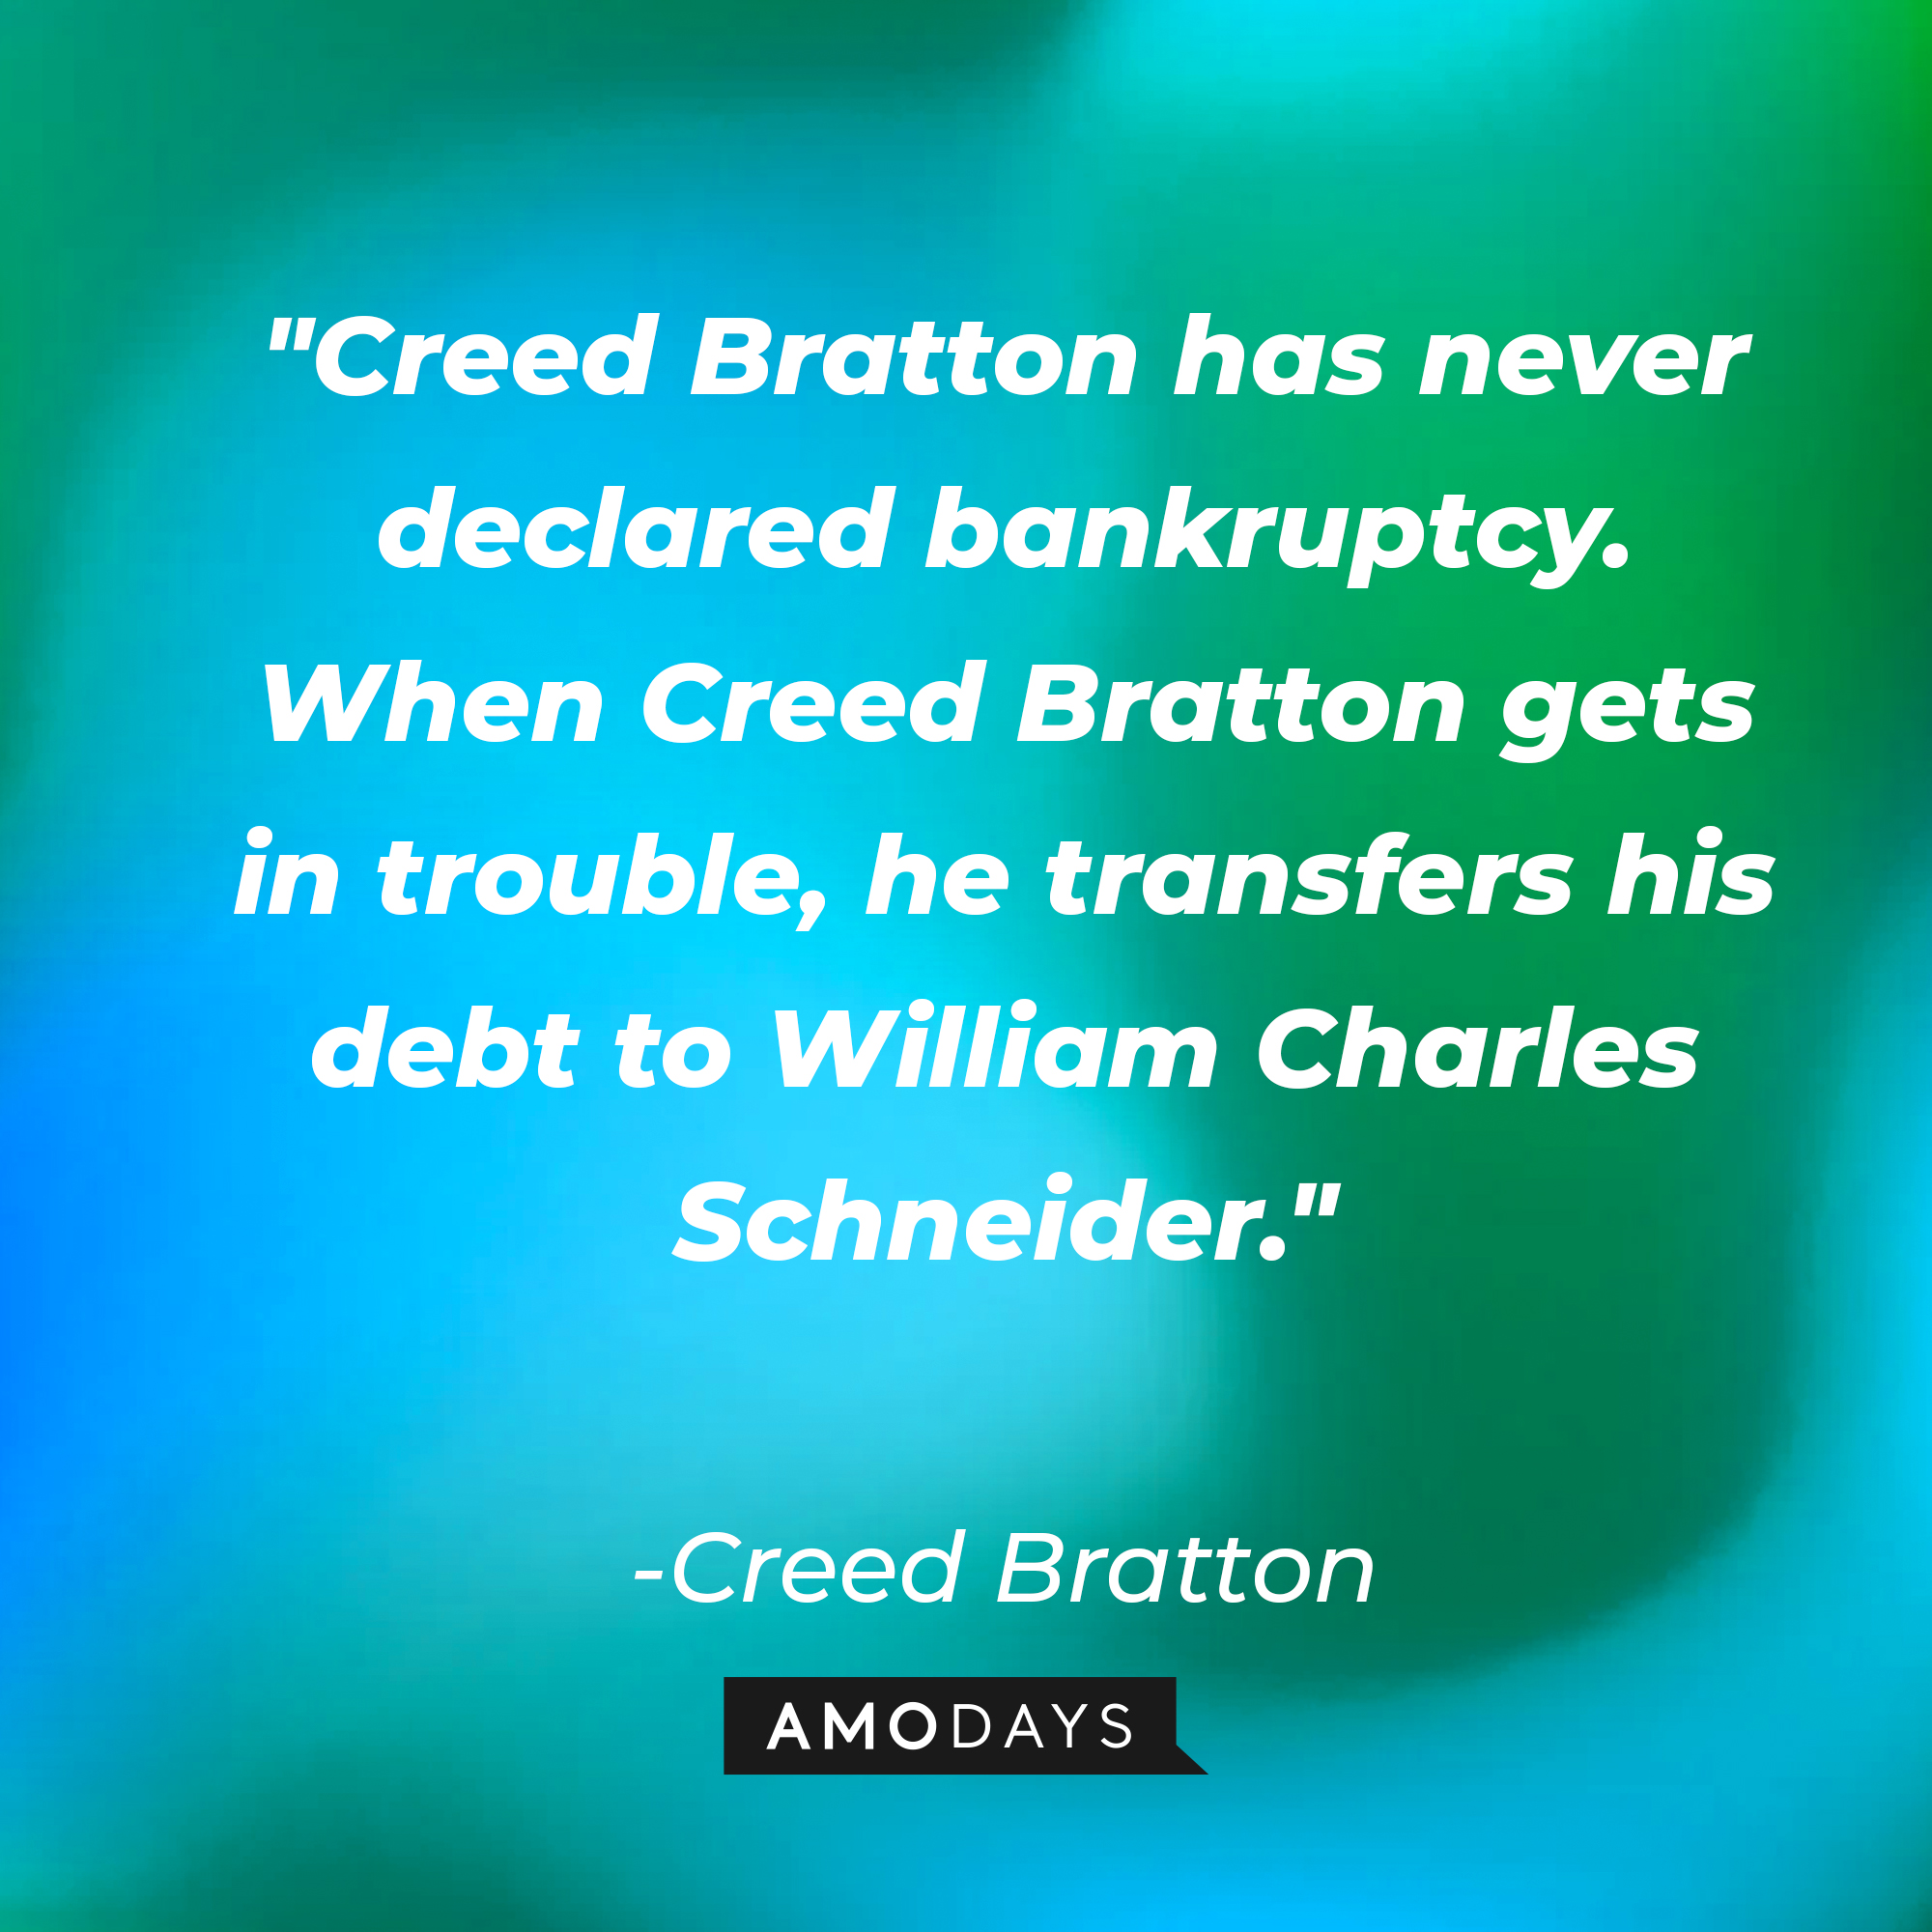 Creed Bratton's quote: "Creed Bratton has never declared bankruptcy. When Creed Bratton gets in trouble, he transfers his debt to William Charles Schneider." | Source: AmoDays